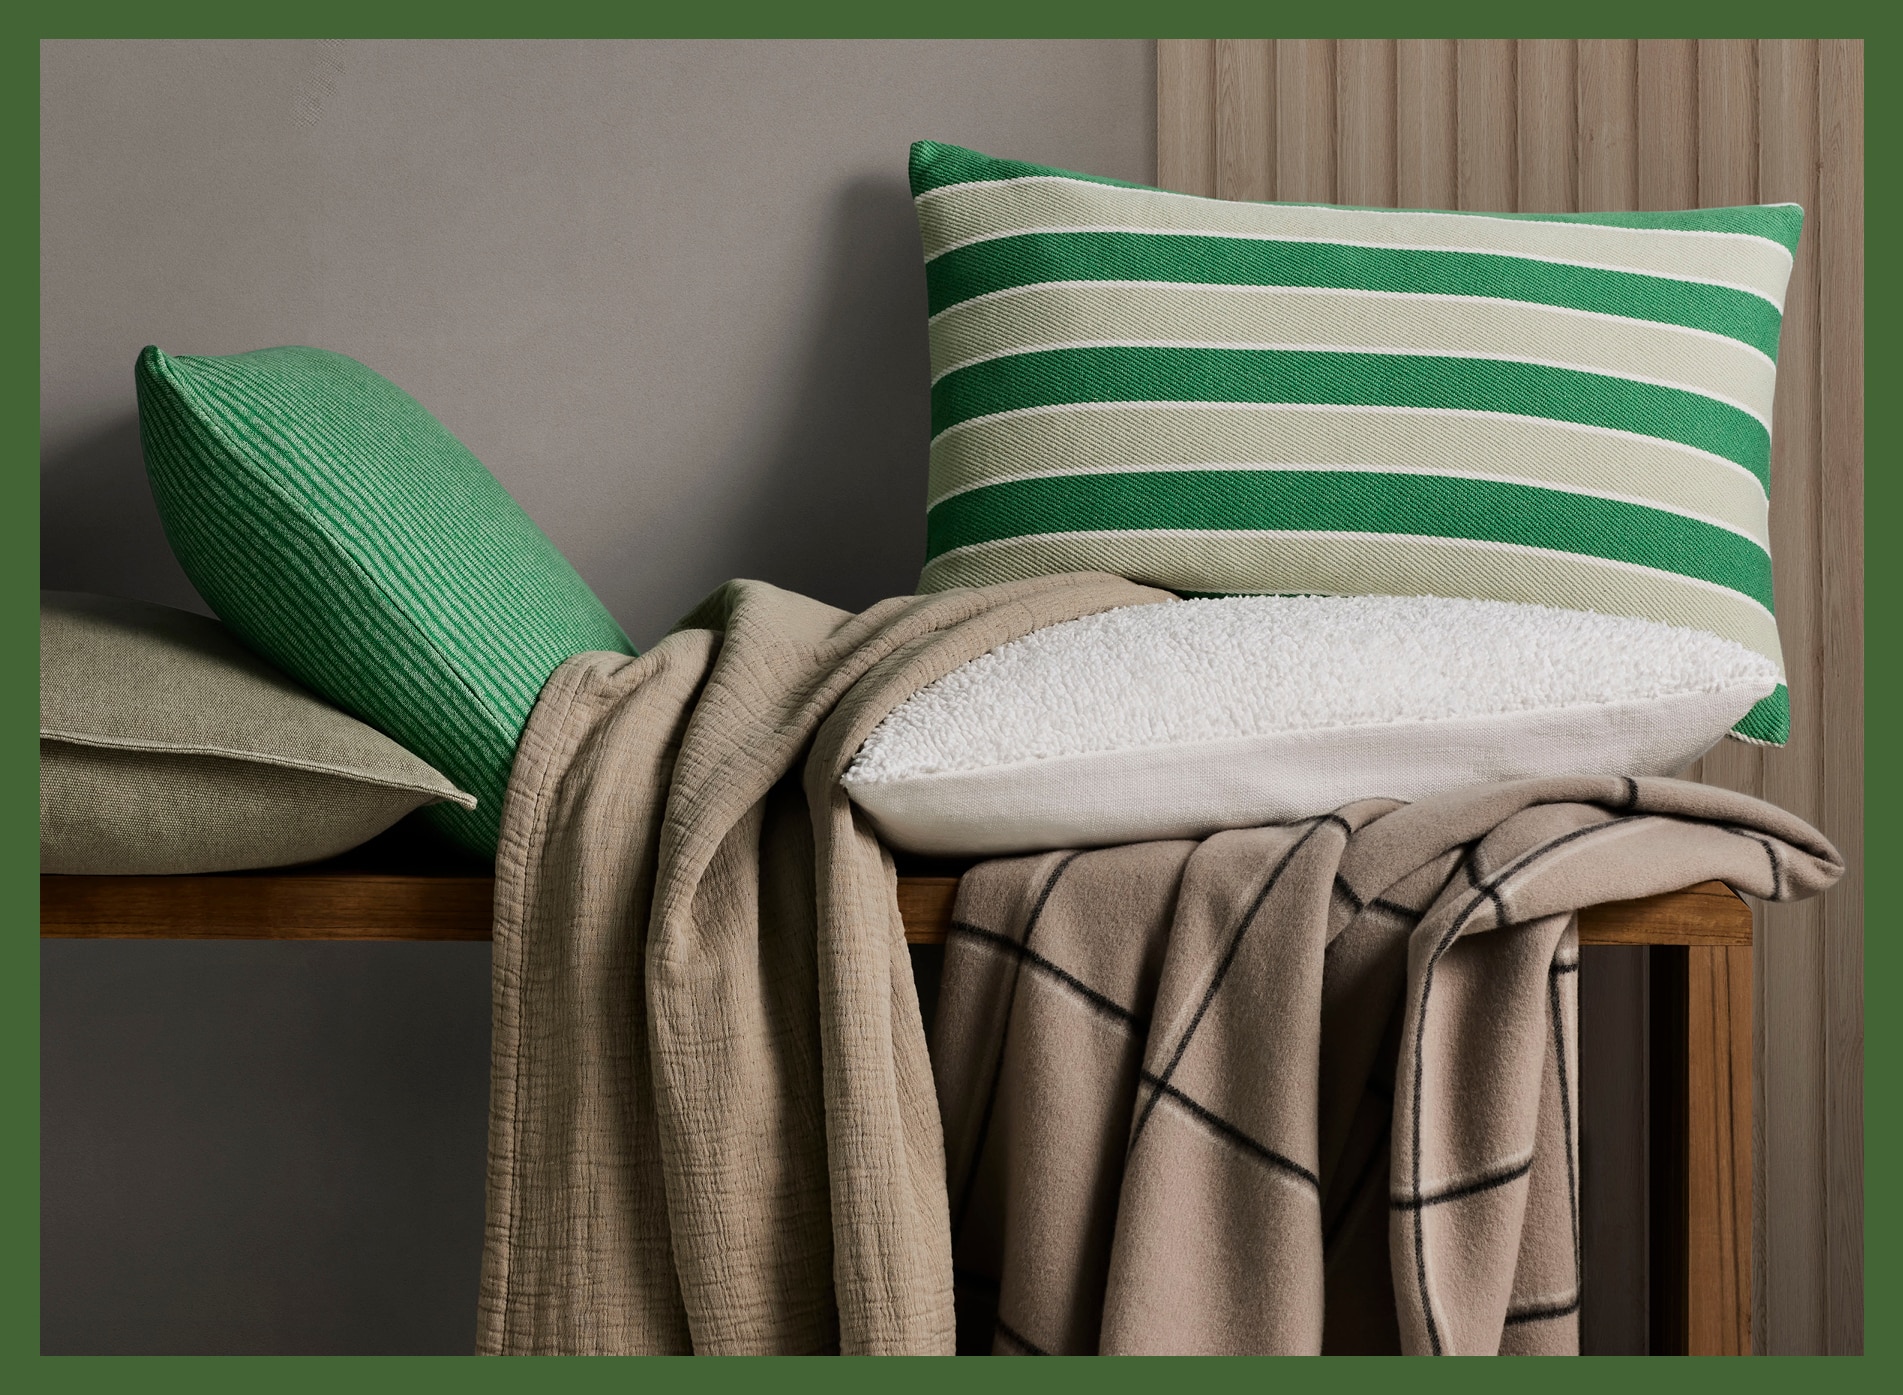 green home decor in styled shot. four pillows, two green stripes, one khaki one white are styled on top of two throws, one a textured brown, one a khaki check with black and white lines. products sit on a wooden bench. image is surrounded by green border.